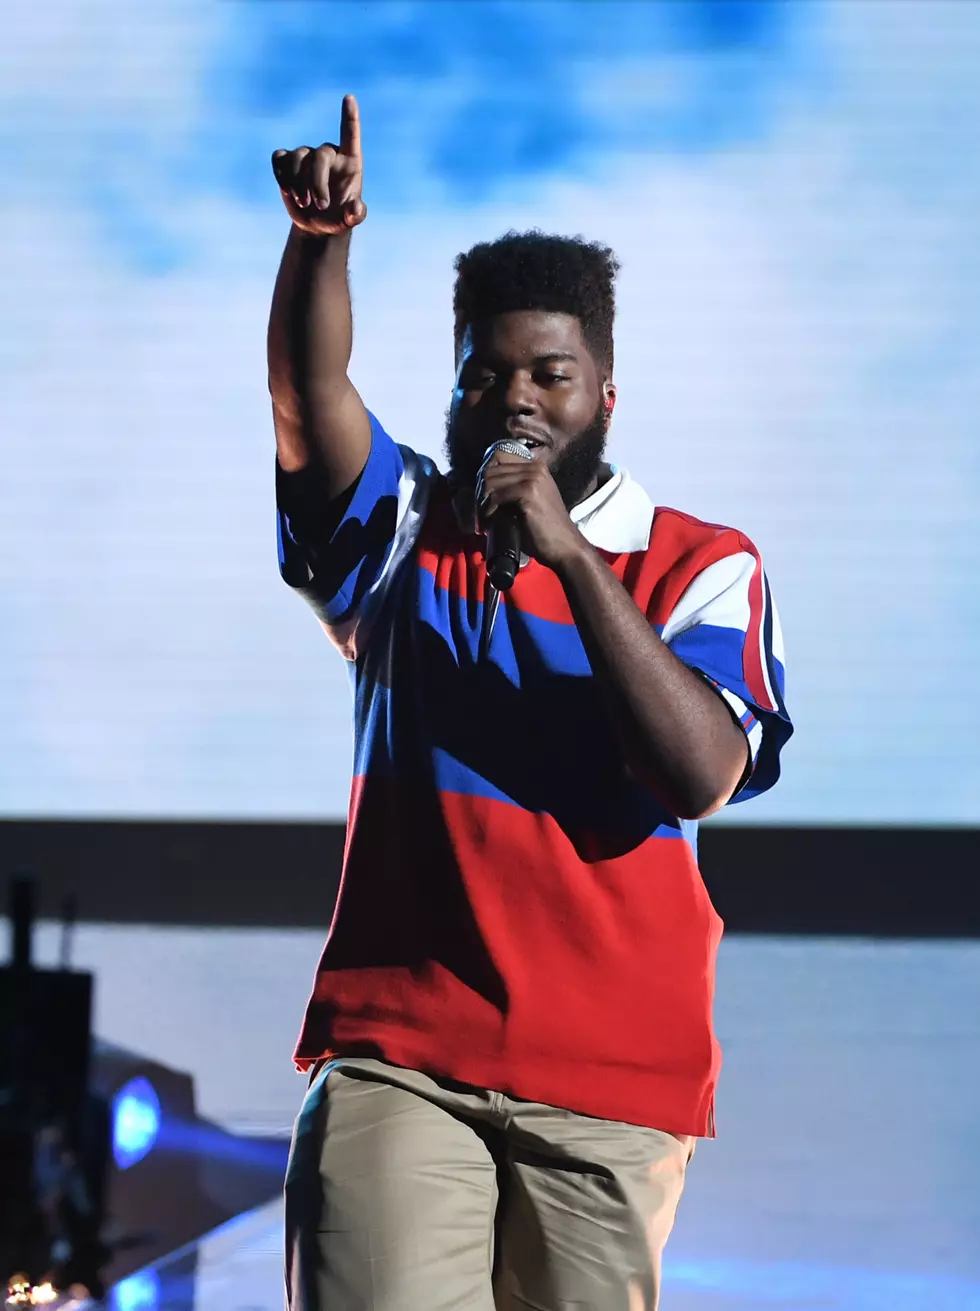 B106 has your chance to win passes to see Khalid!